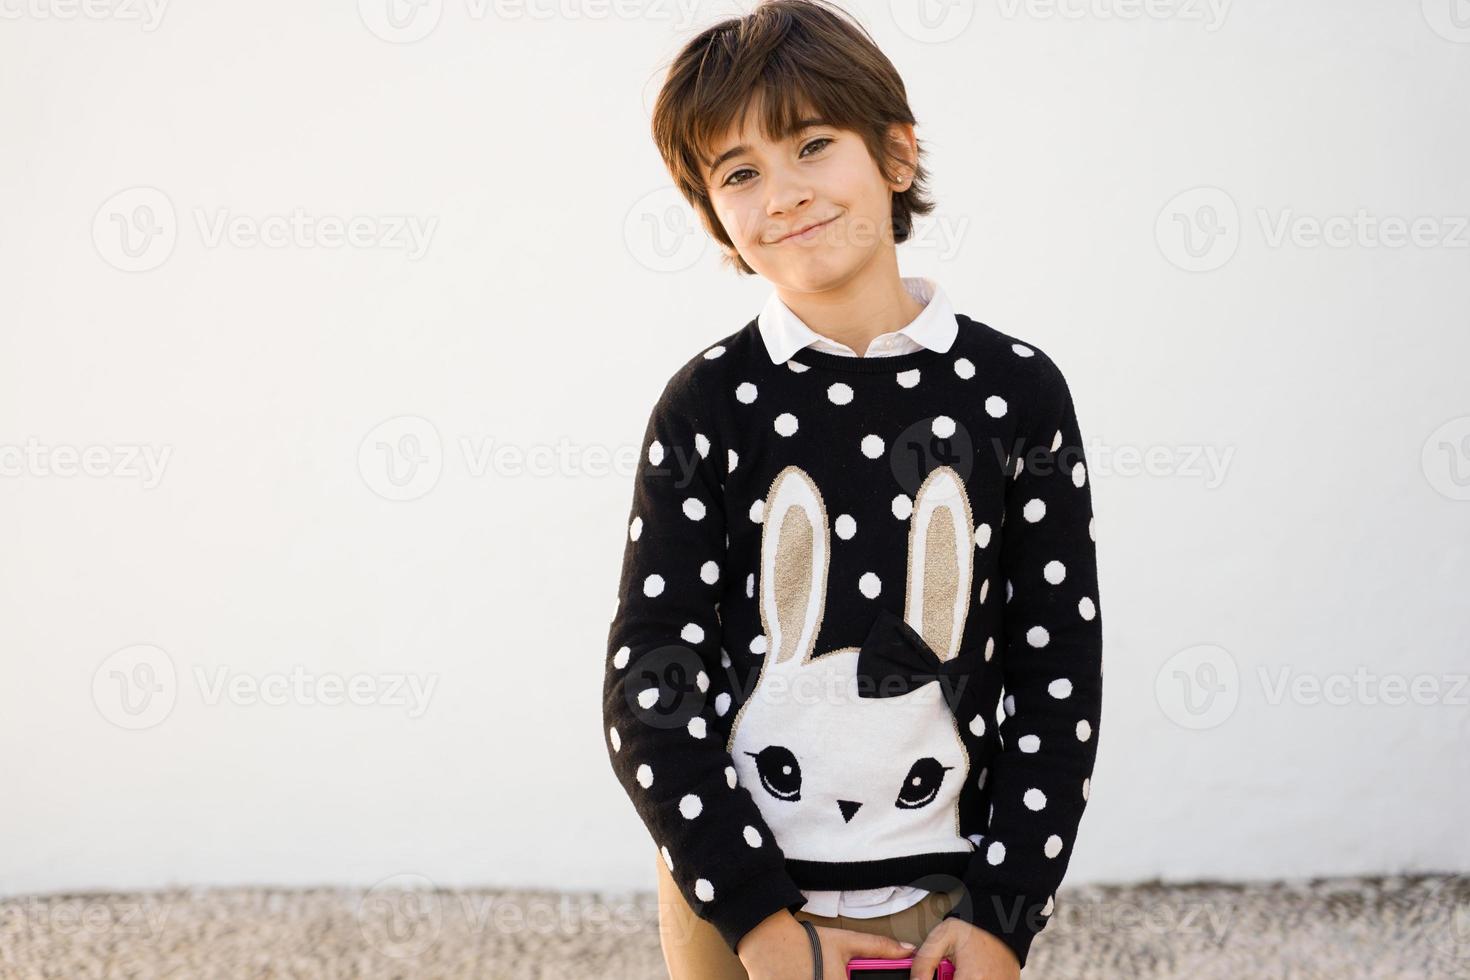 Seven years old girl with short hair smiling on a white wall photo